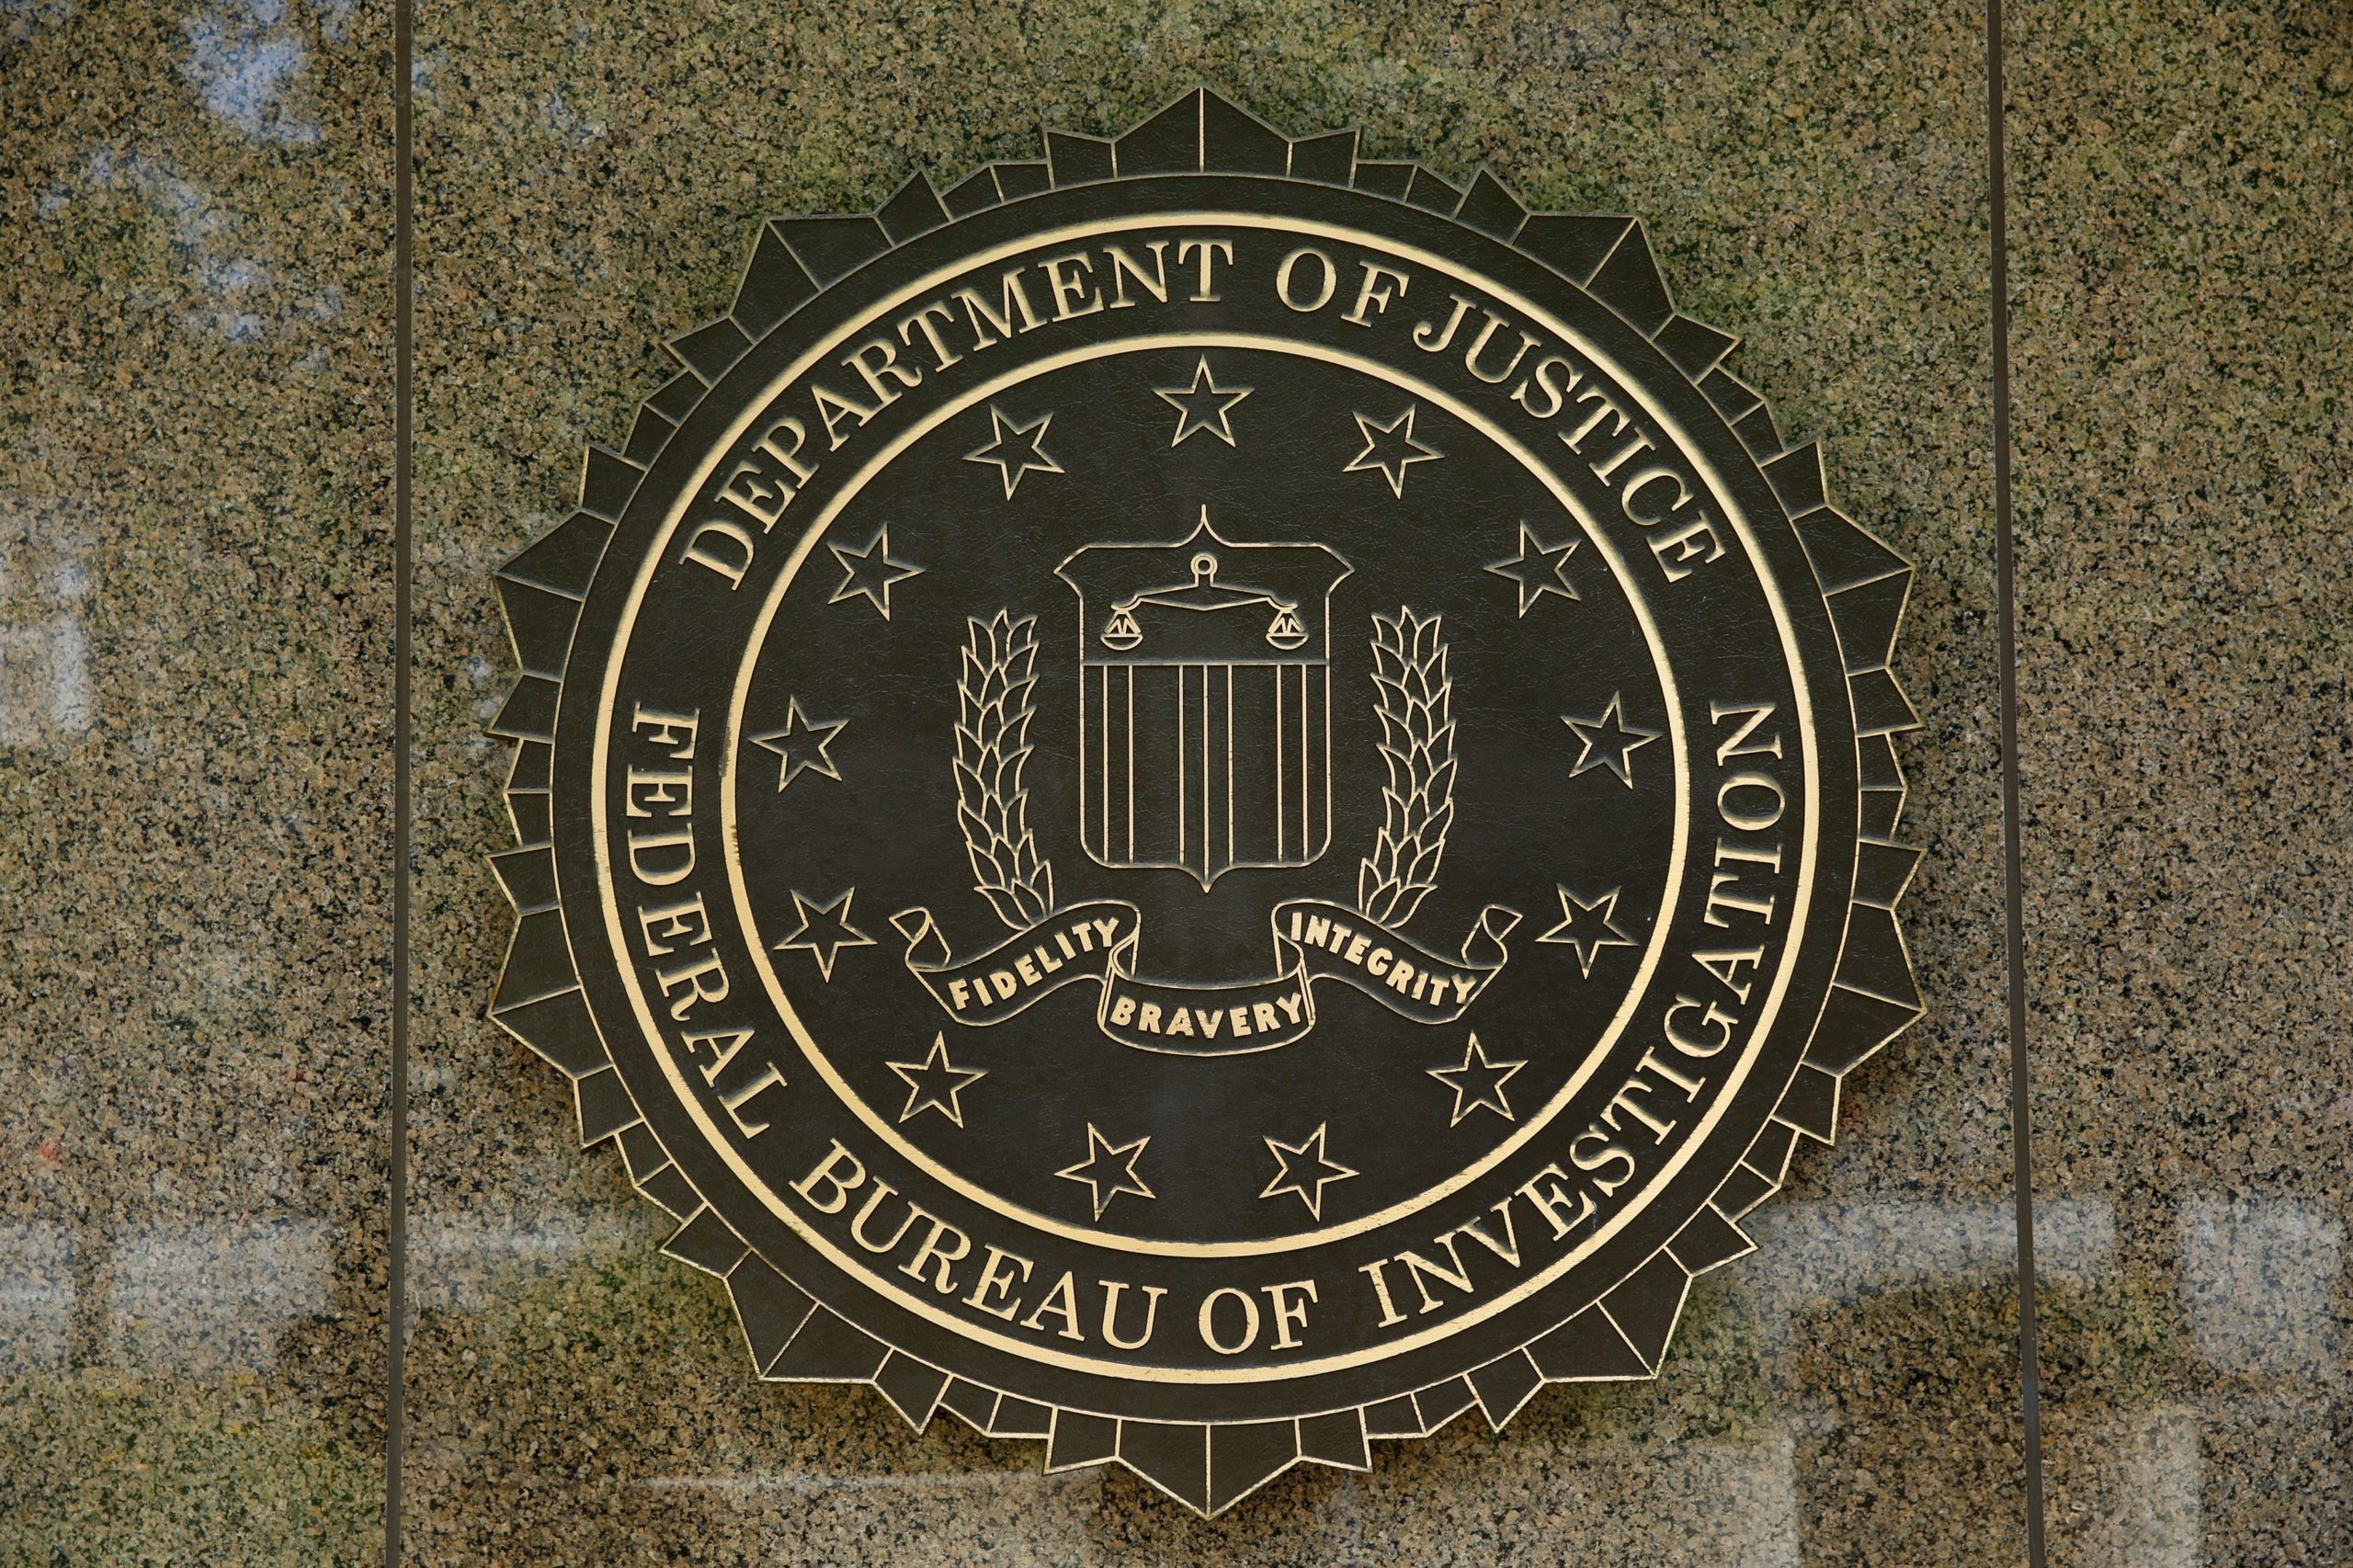 The FBI seal is seen outside the headquarters building in Washington, DC on July 5, 2016. - The FBI said Tuesday it will not recommend charges over Hillary Clinton's use of a private email server as secretary of state, but said she had been "extremely careless" in her handling of top secret data. The decision not to recommend prosecution will come as a huge relief for the presumptive Democratic nominee whose White House campaign has been dogged by the months-long probe. (Photo credit YURI GRIPAS/AFP via Getty Images)